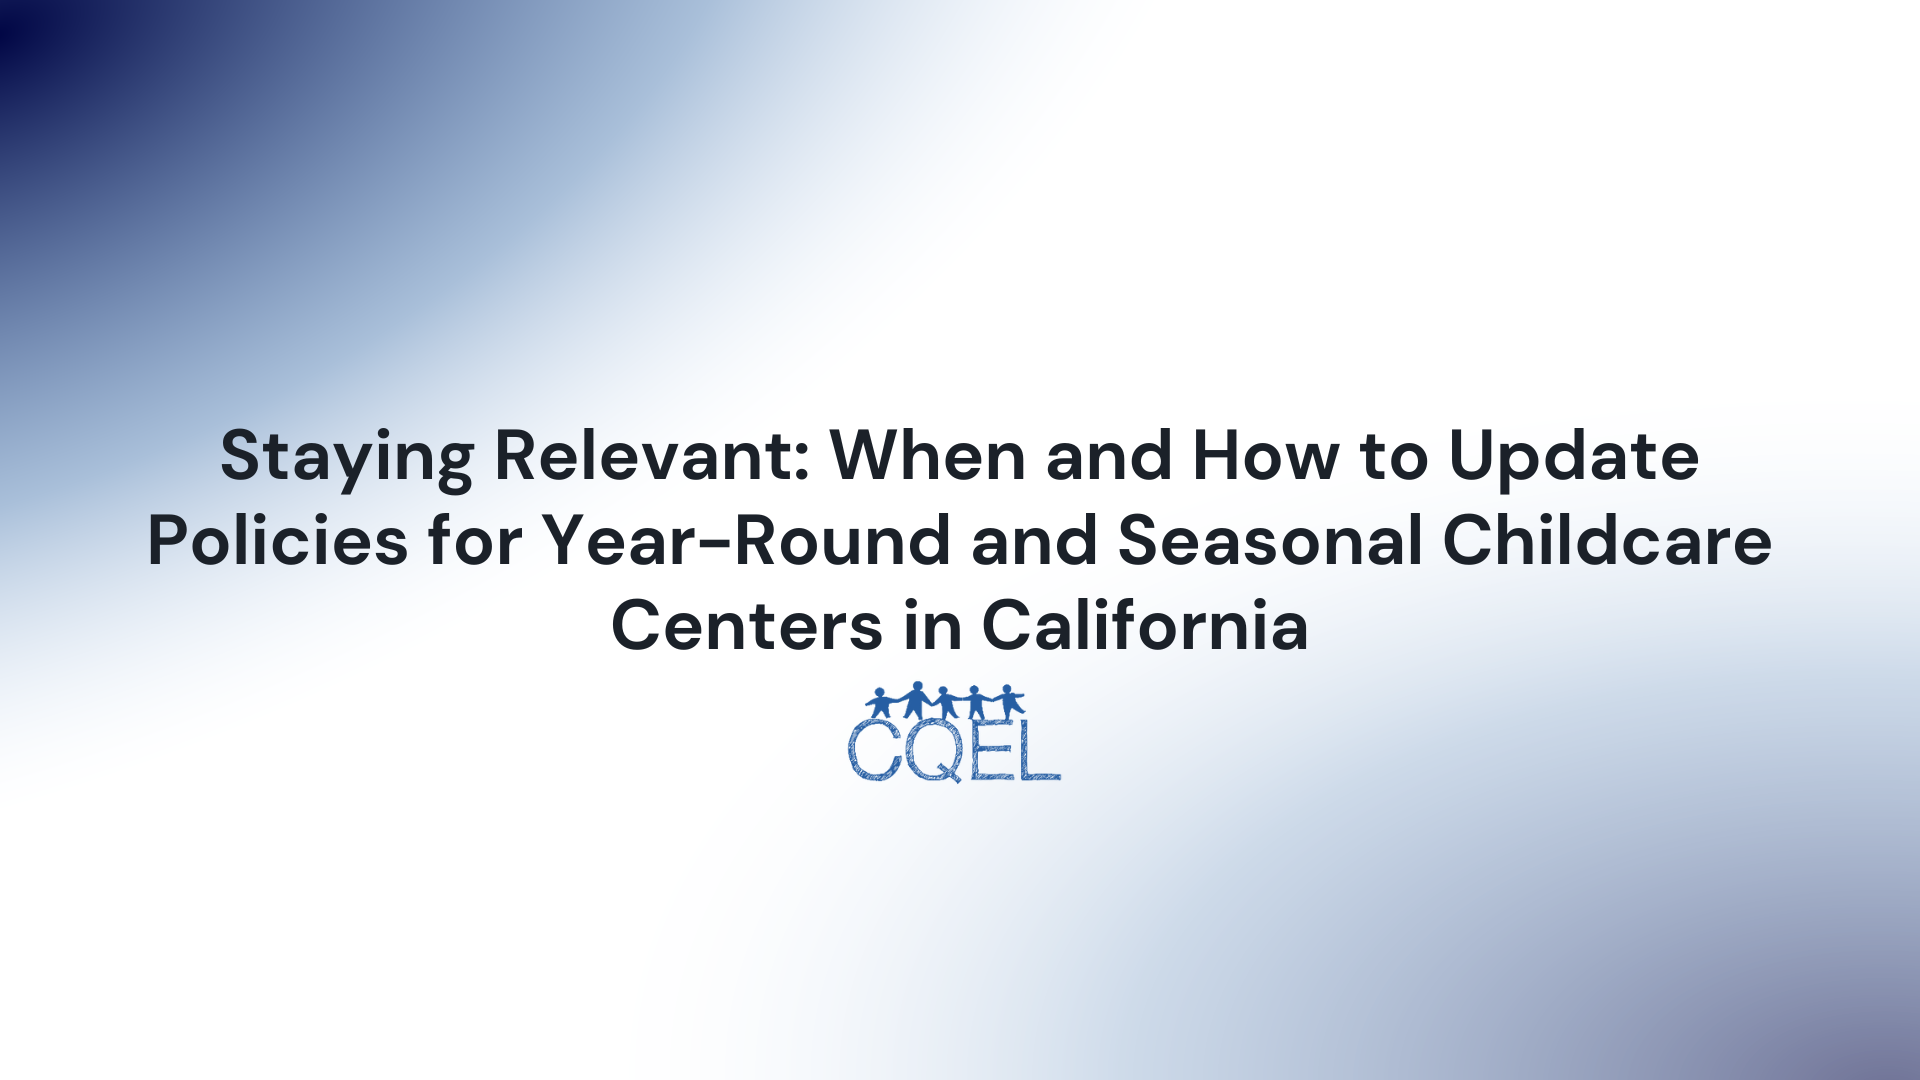 Staying Relevant: When and How to Update Policies for Year-Round and Seasonal Childcare Centers in California